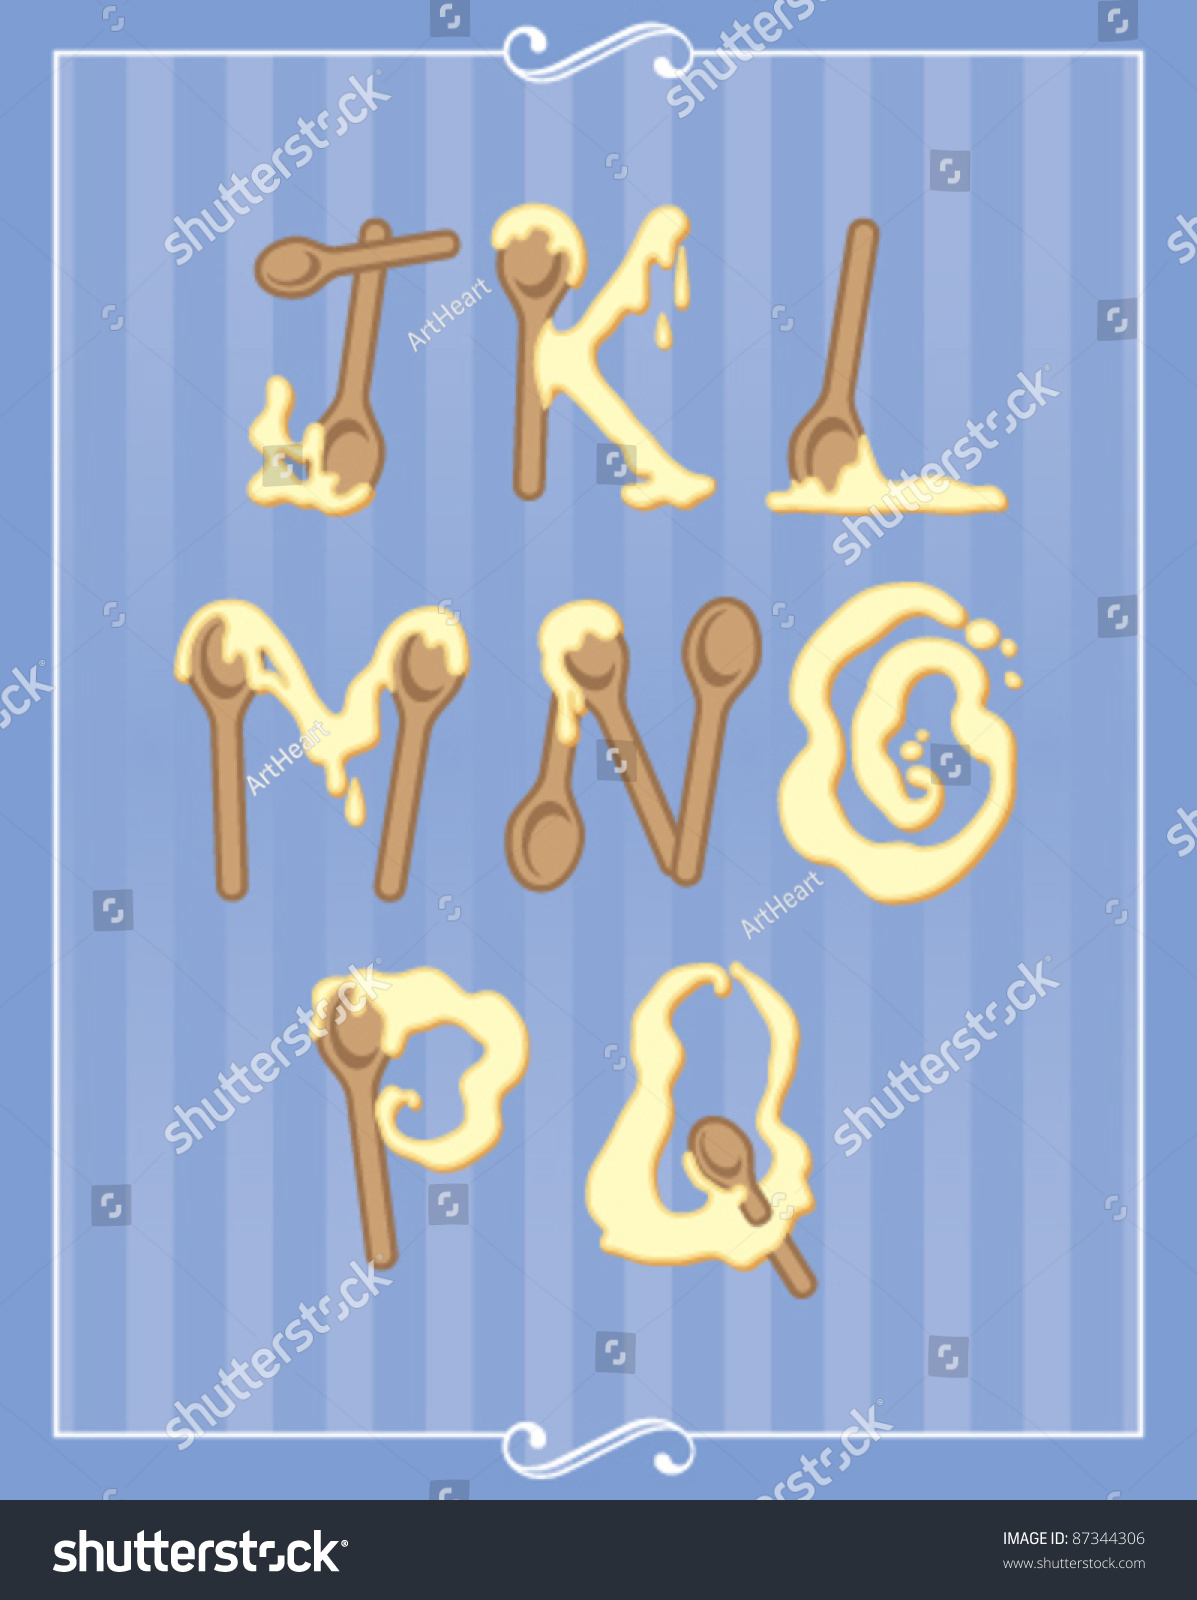 SVG of Baking Alphabet of spoons mixing sticky batter or dough, part 2 of 3 (j - q) svg